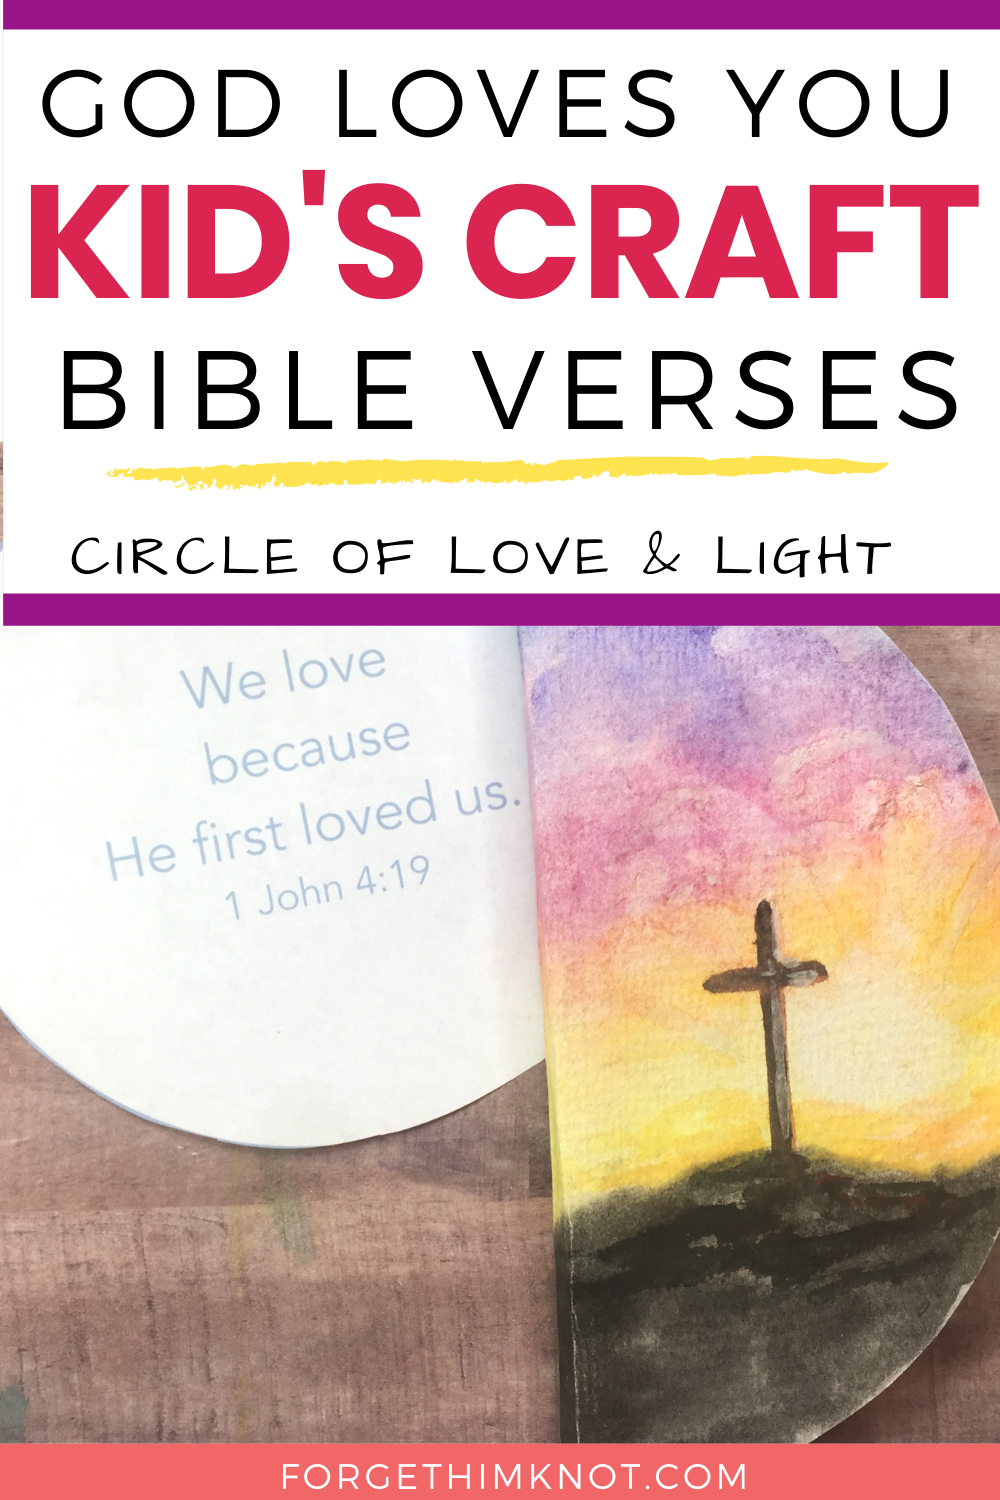 God Love You! Circle of love and light mnni book of Bible verses